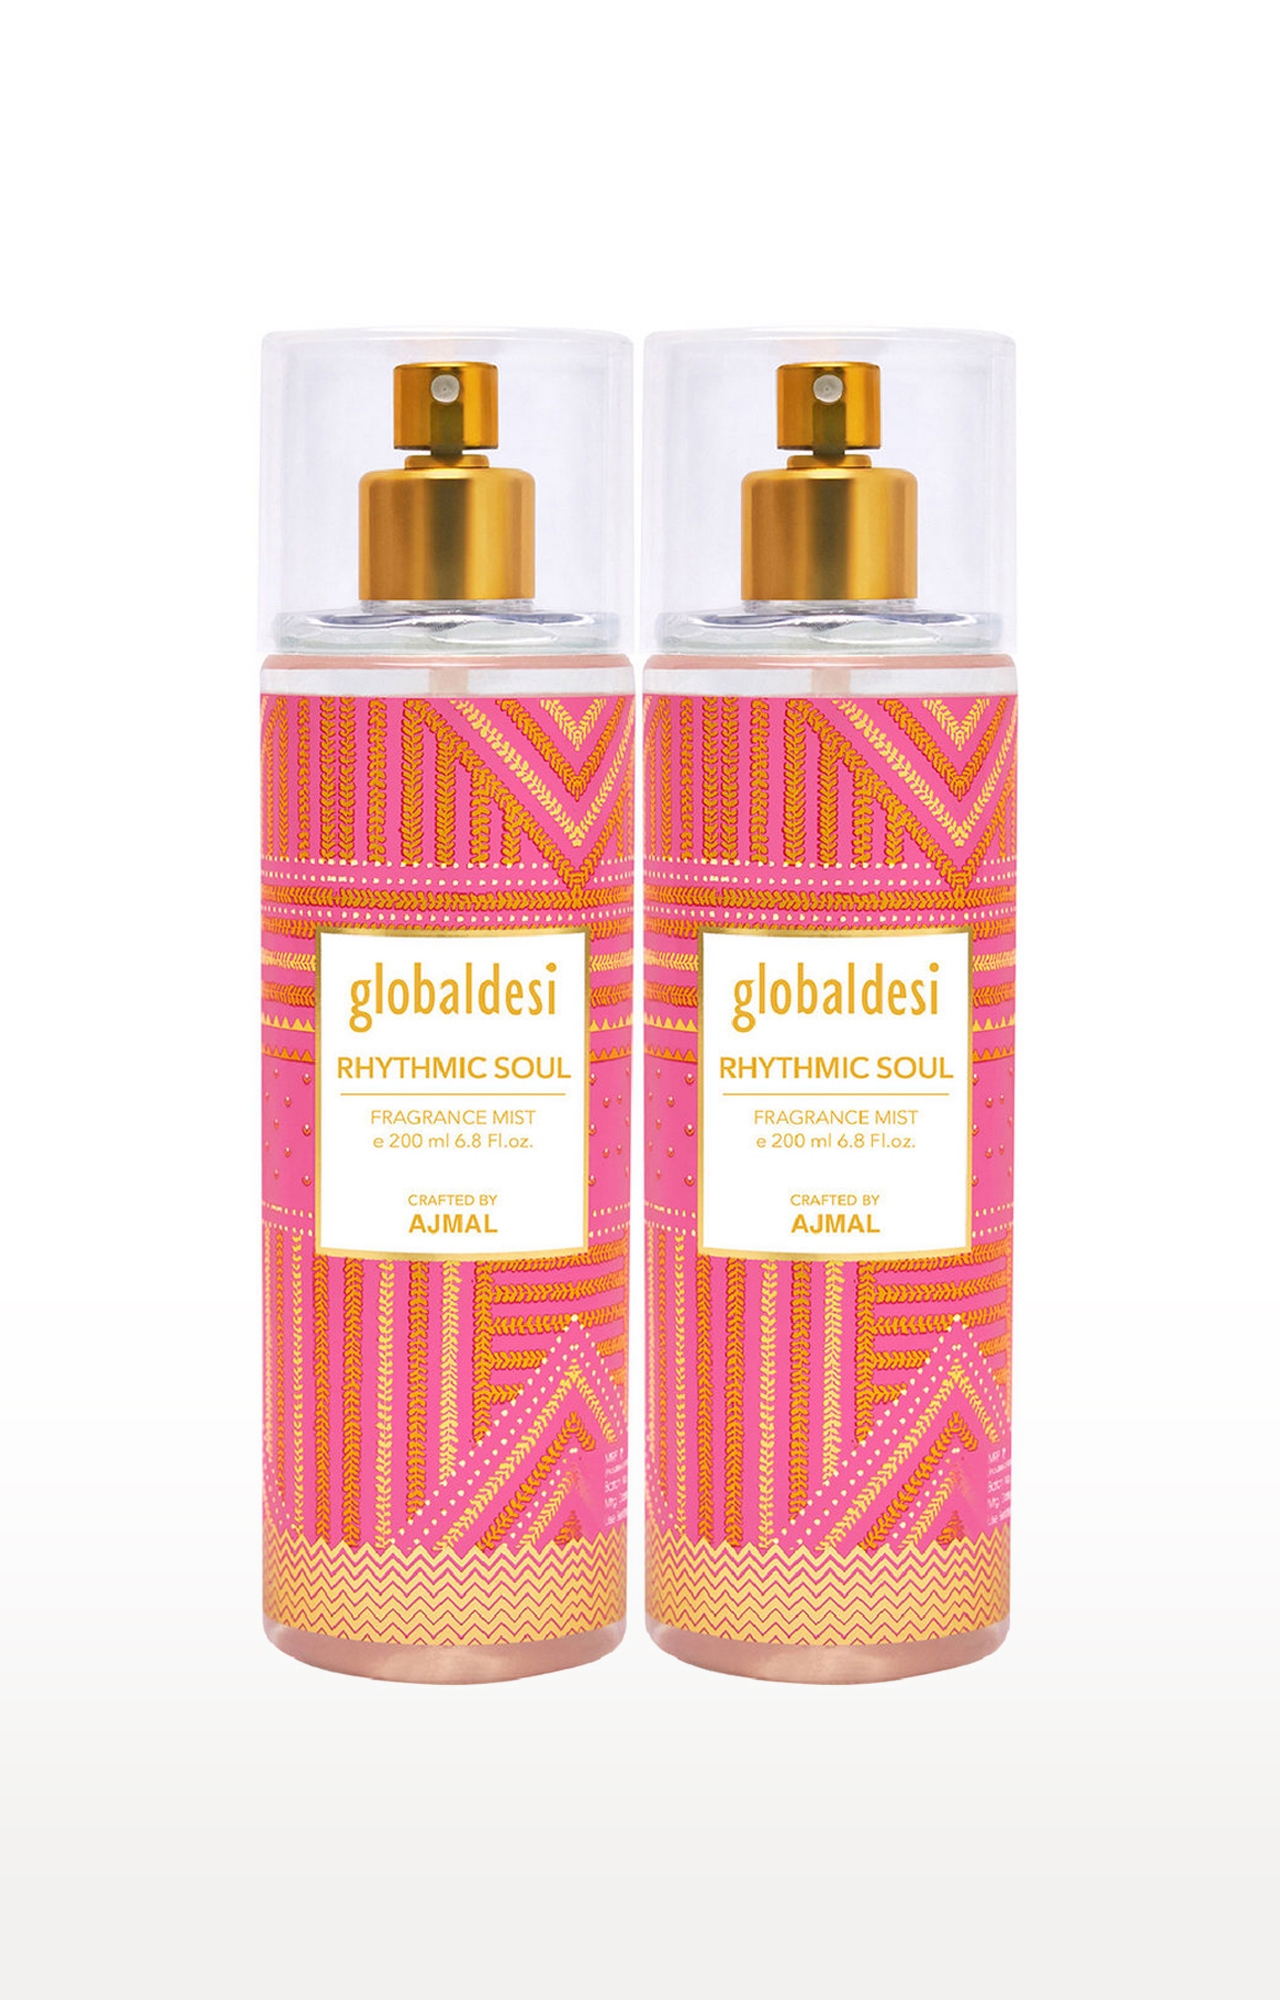 Global Desi Crafted By Ajmal | Global Desi Rhythmic Soul Pack of 2 Body Mist 200ML each for Women Crafted by Ajmal  + 2 Parfum Testers